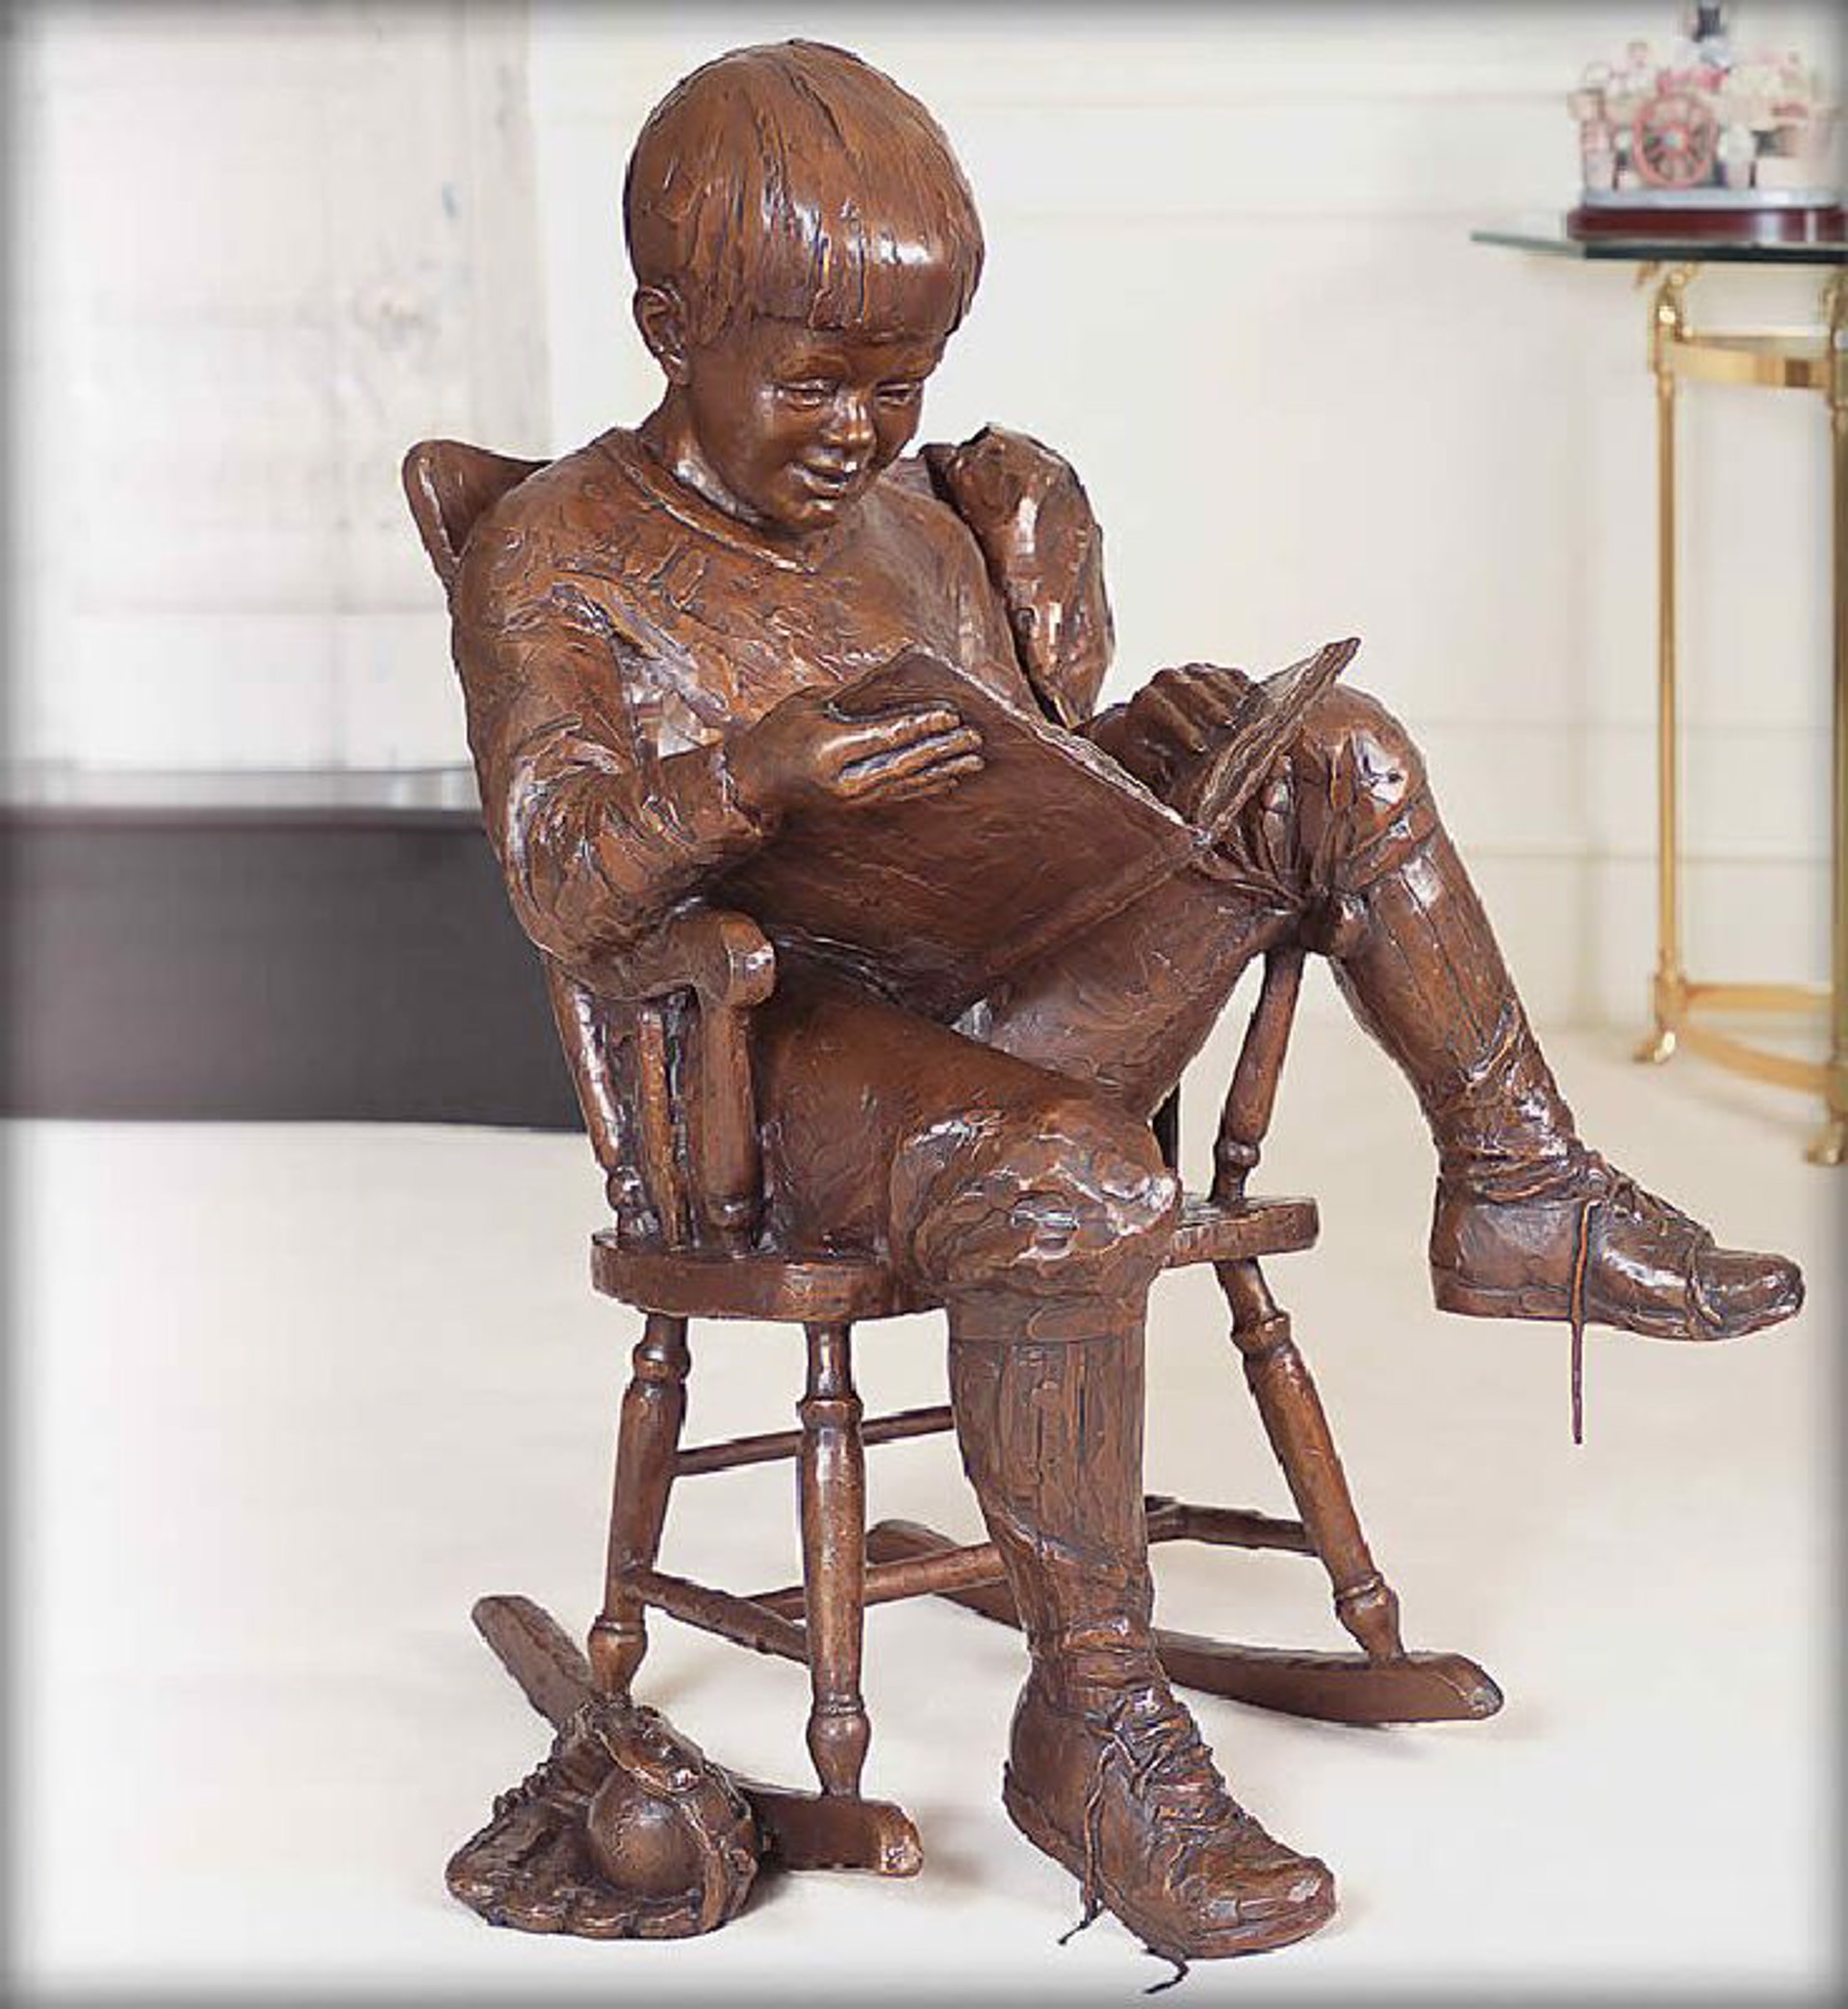 Time Out Boy by Gary Lee Price (sculptor)